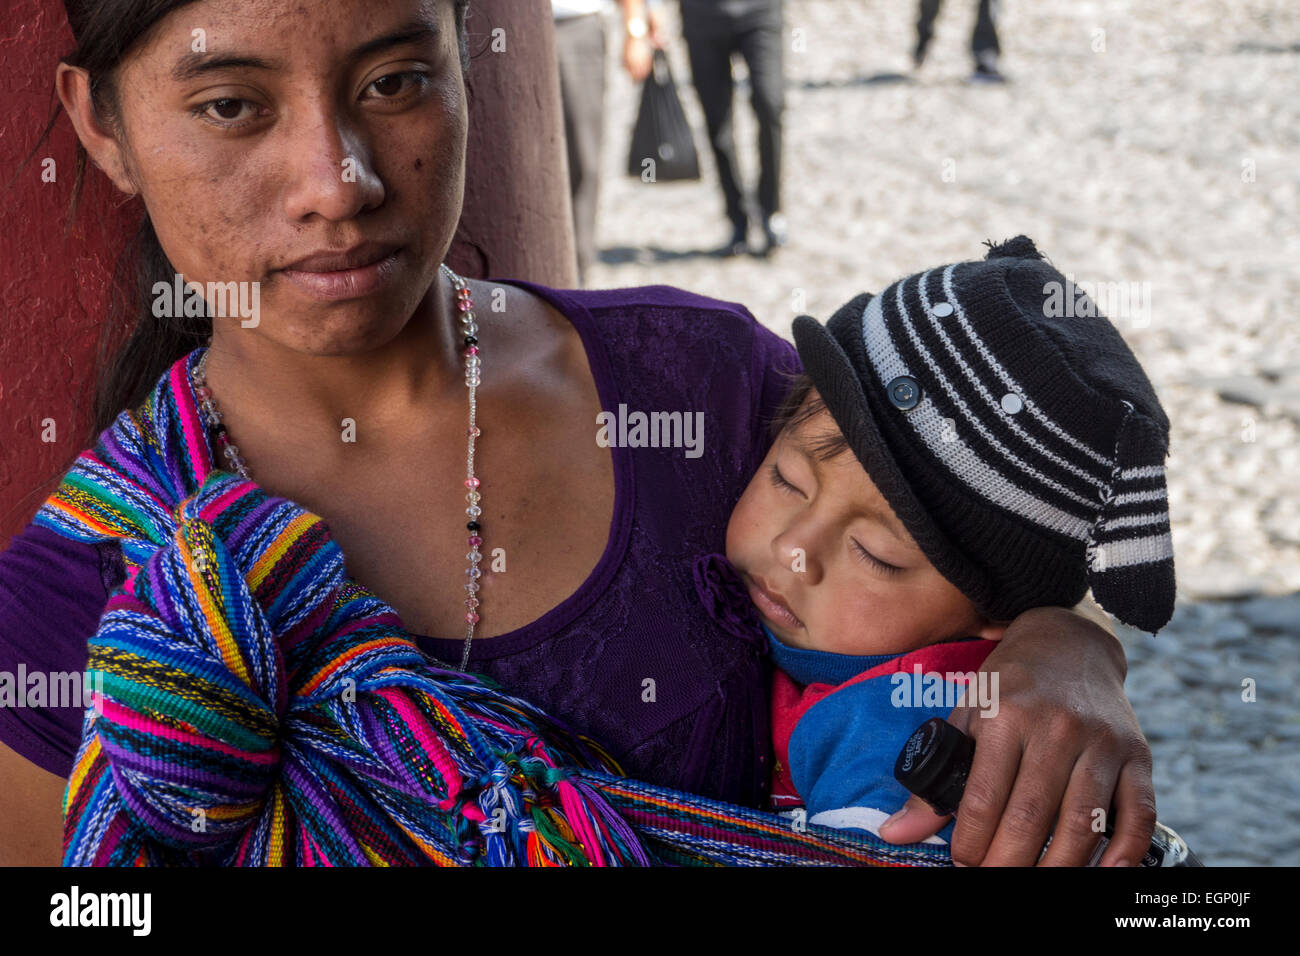 Indigenous woman carries her sleeping child in a sling in Antigua, Guatemala Stock Photo